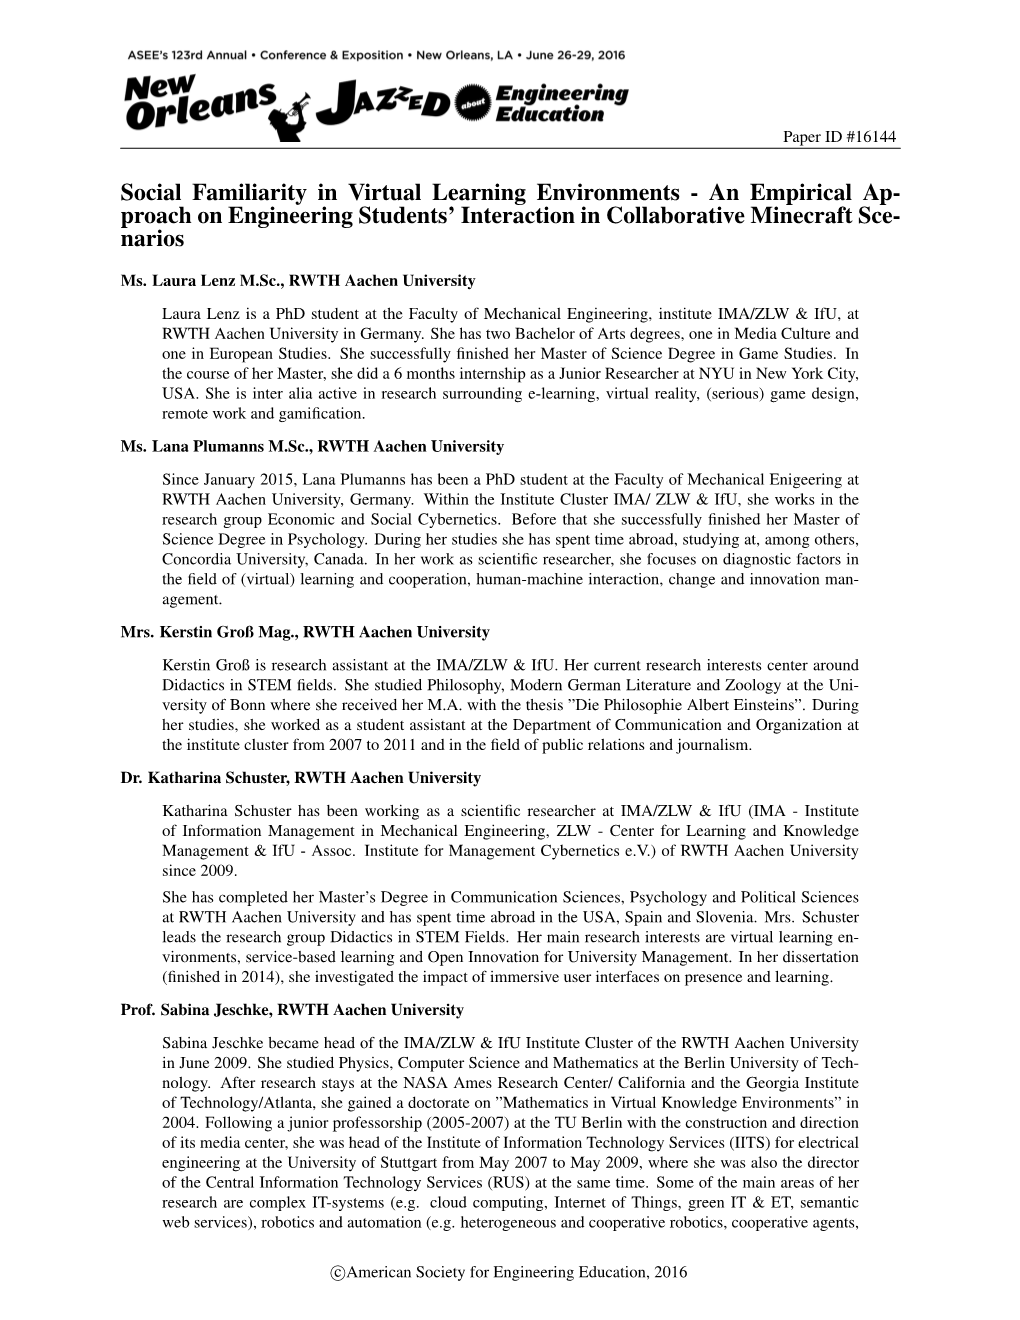 Social Familiarity in Virtual Learning Environments - an Empirical Ap- Proach on Engineering Students’ Interaction in Collaborative Minecraft Sce- Narios